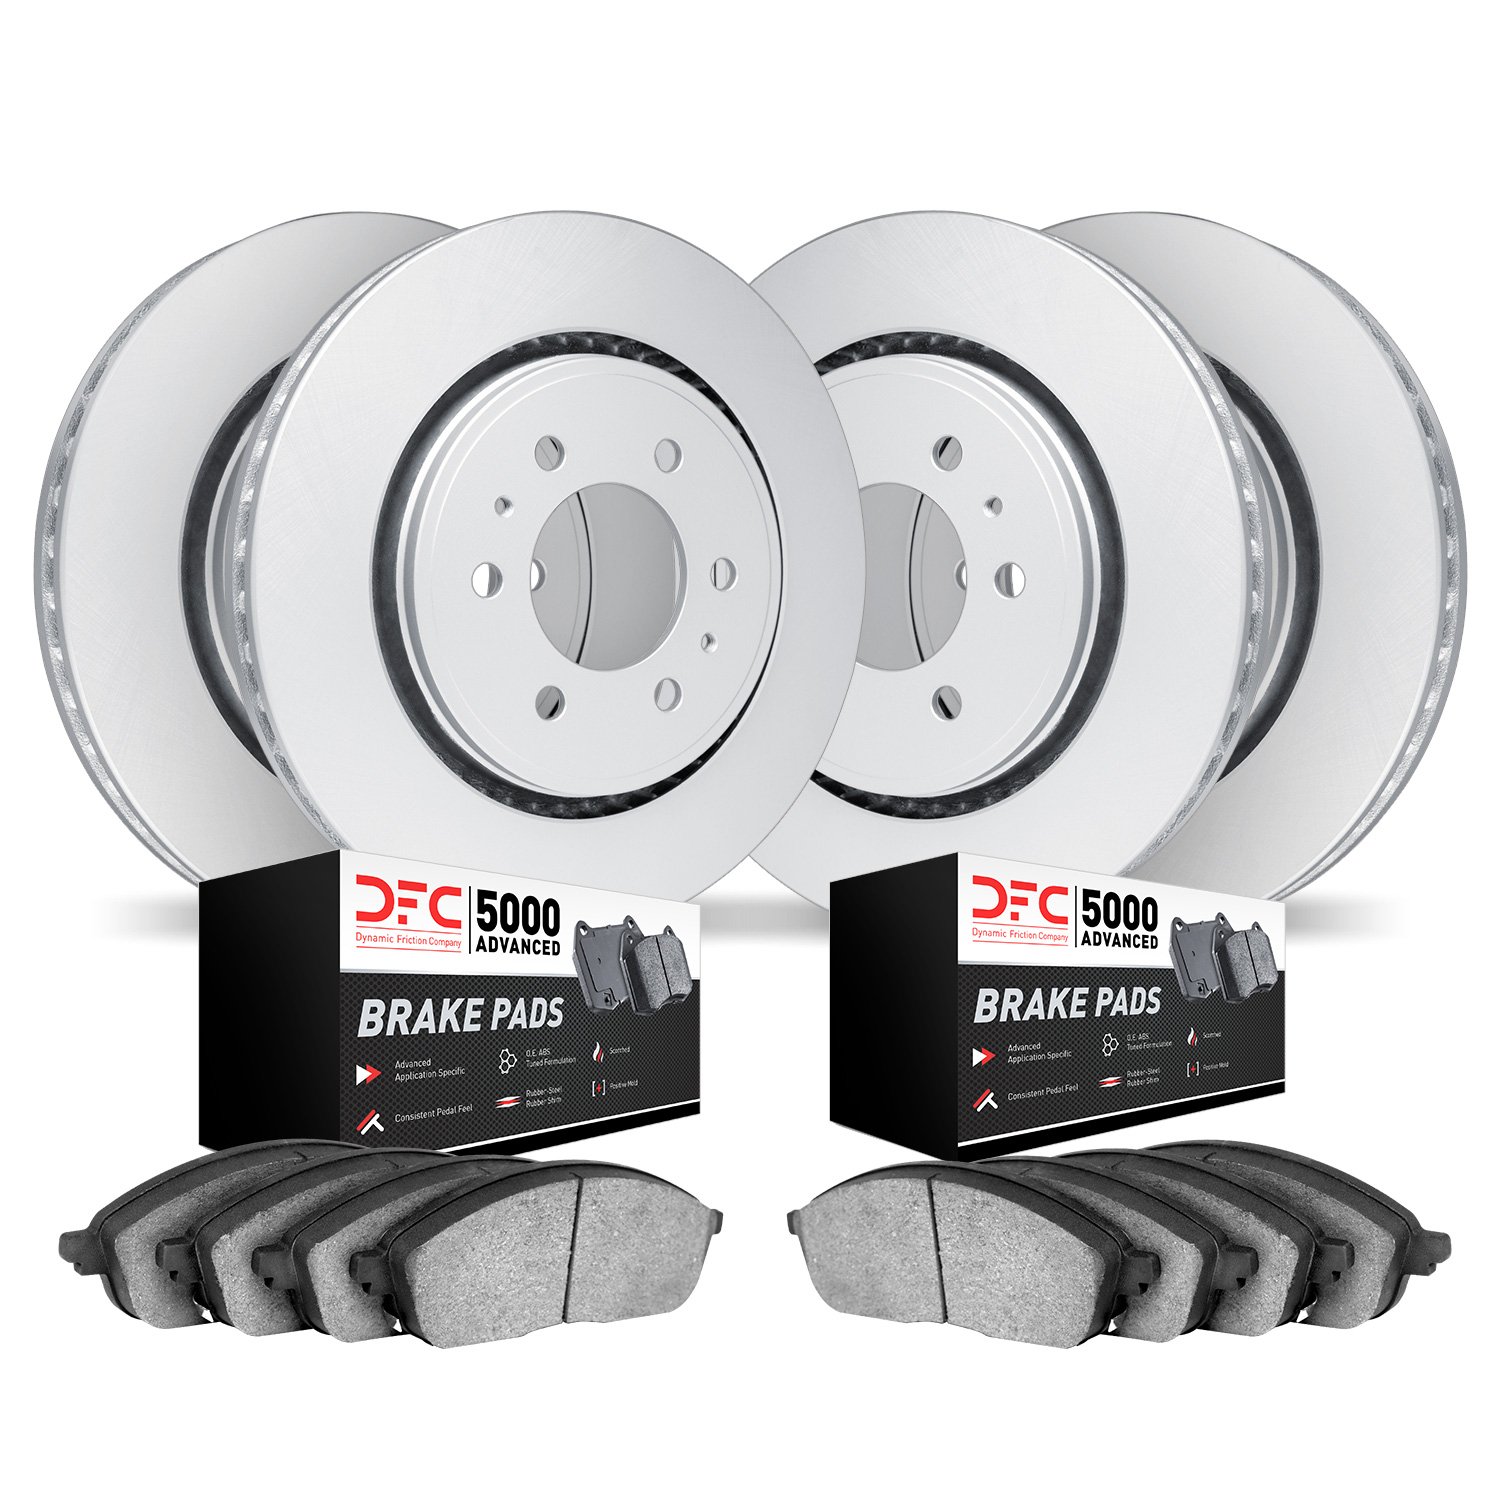 4504-48028 Geospec Brake Rotors w/5000 Advanced Brake Pads Kit, 2006-2009 GM, Position: Front and Rear